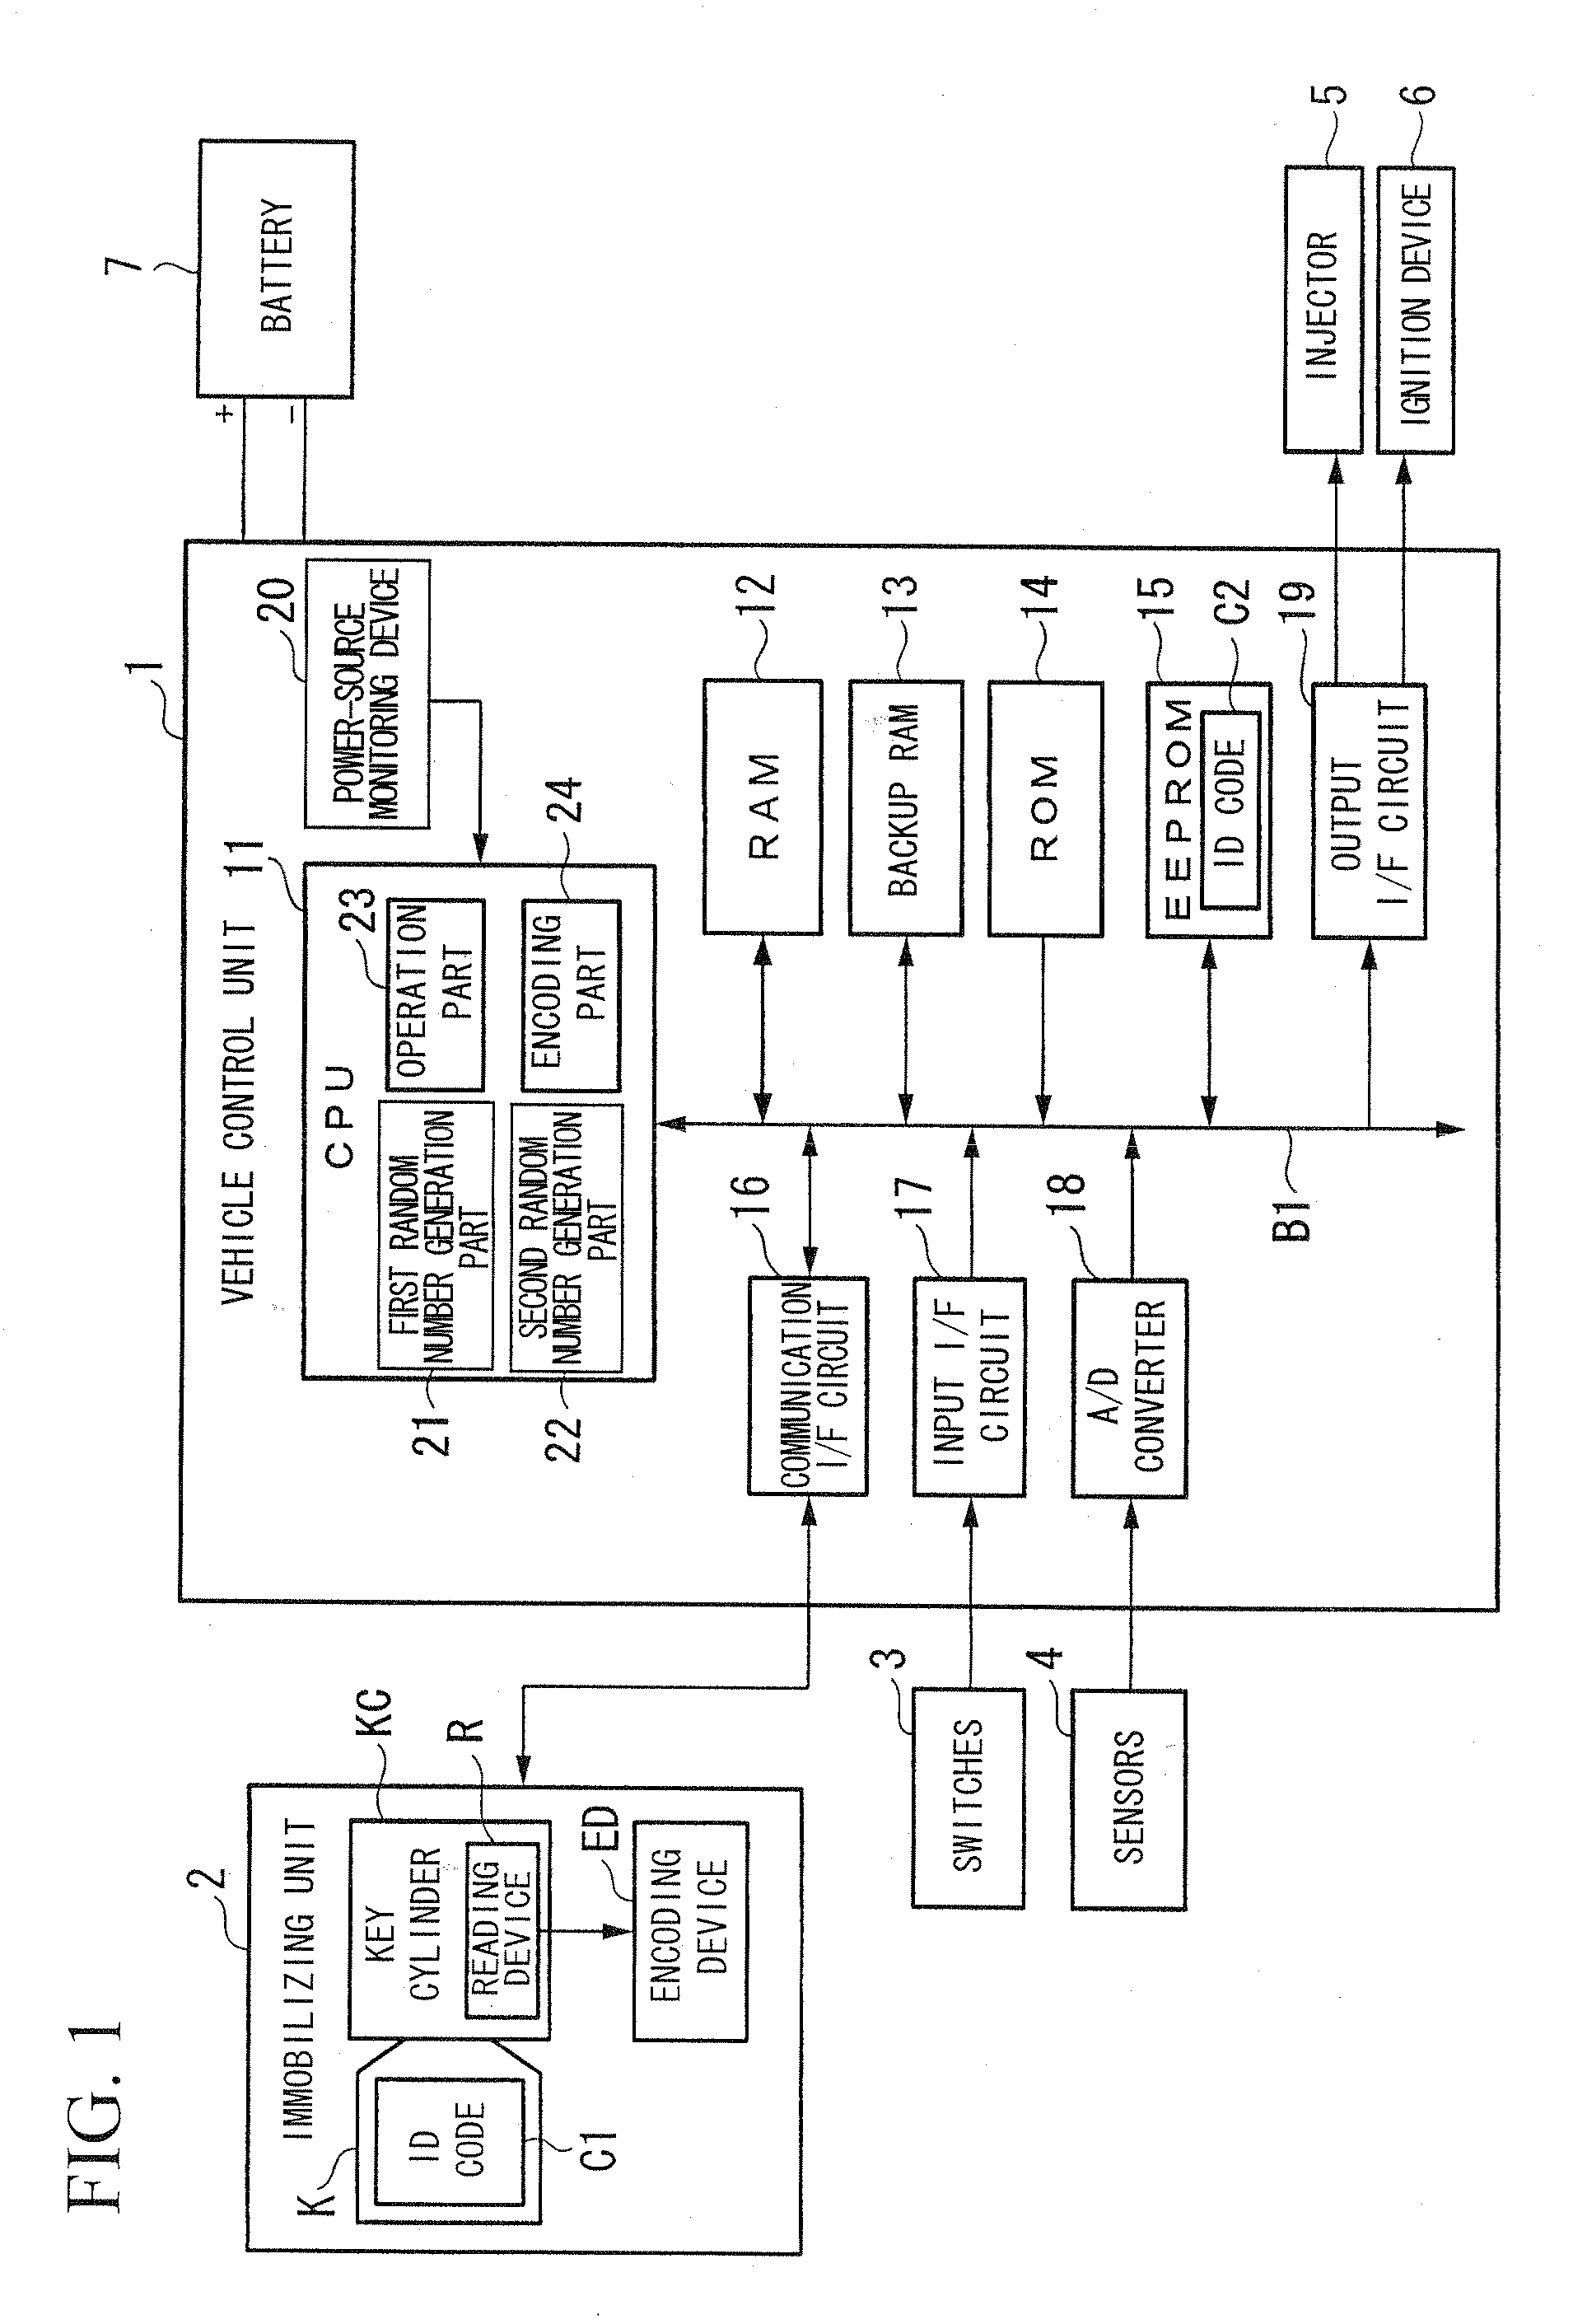 Random number generation device and vehicle control device